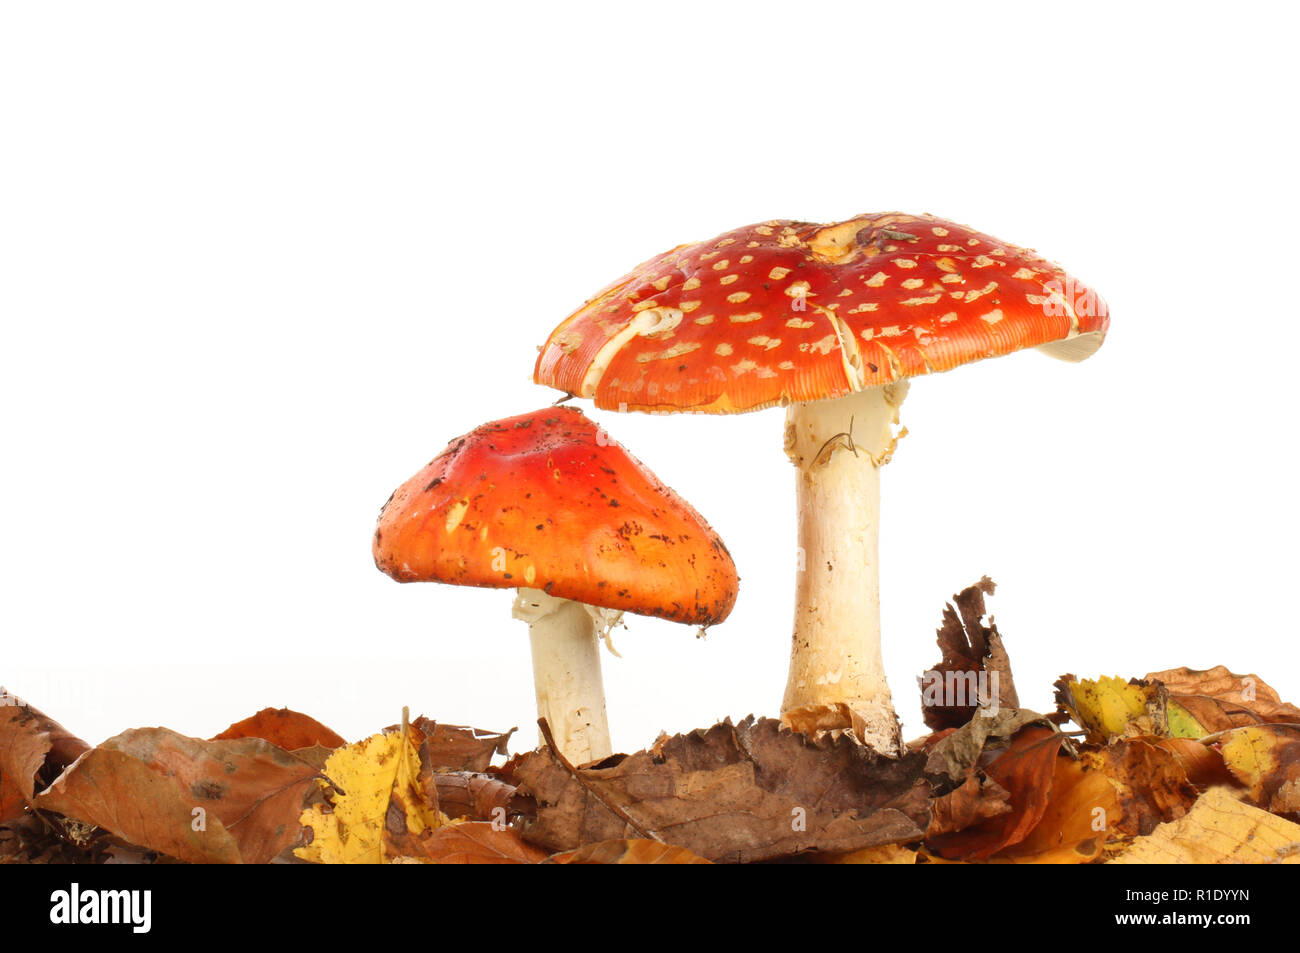 Two fly agaric mushrooms growing in leaf litter against a white background Stock Photo